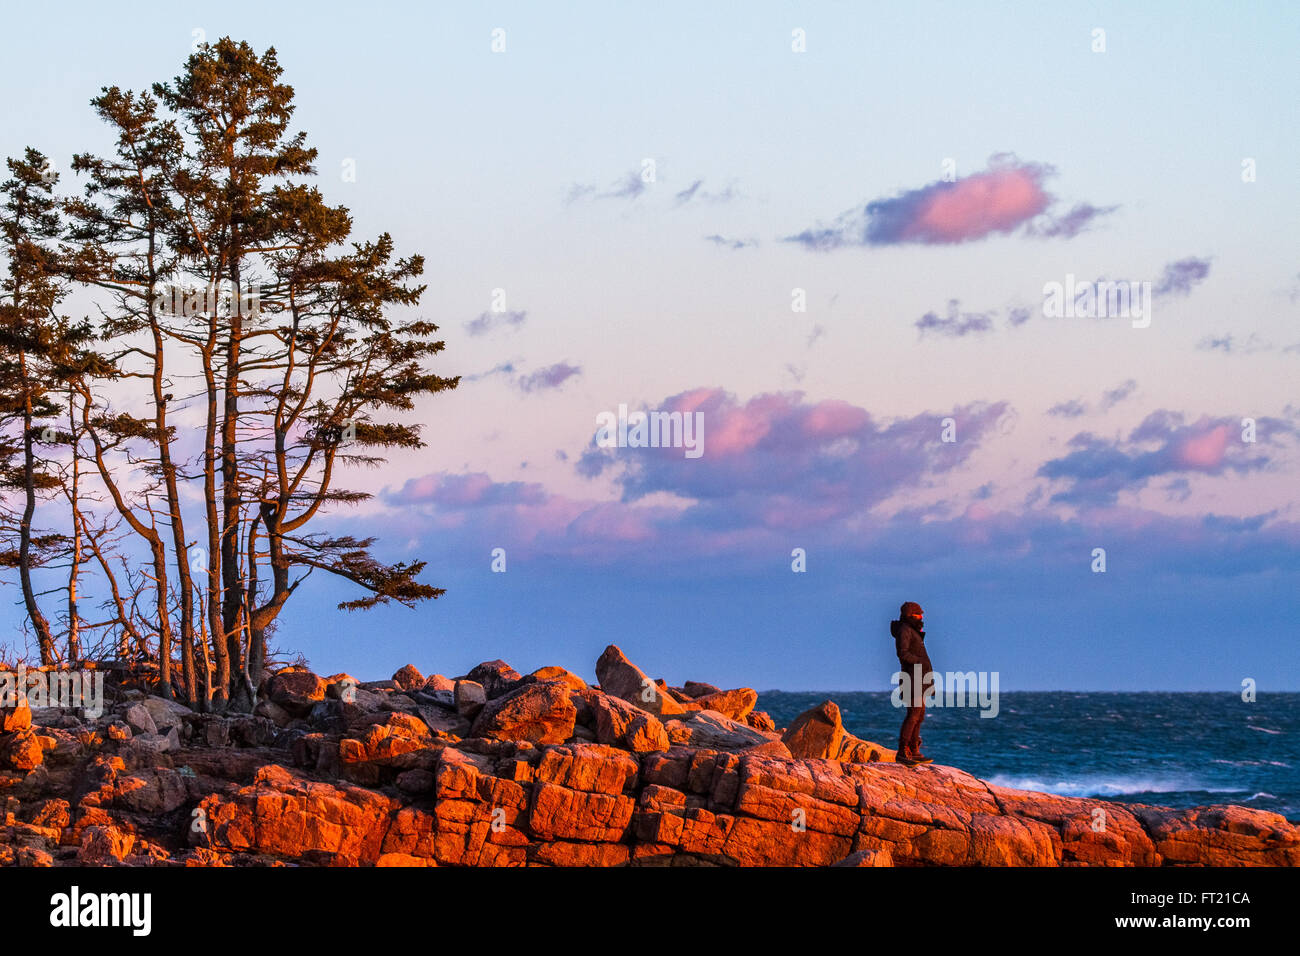 A girl stands on the rocky shore, illuminated by the orange light of the sun in Acadia National Park, Mount Desert Island, Maine Stock Photo